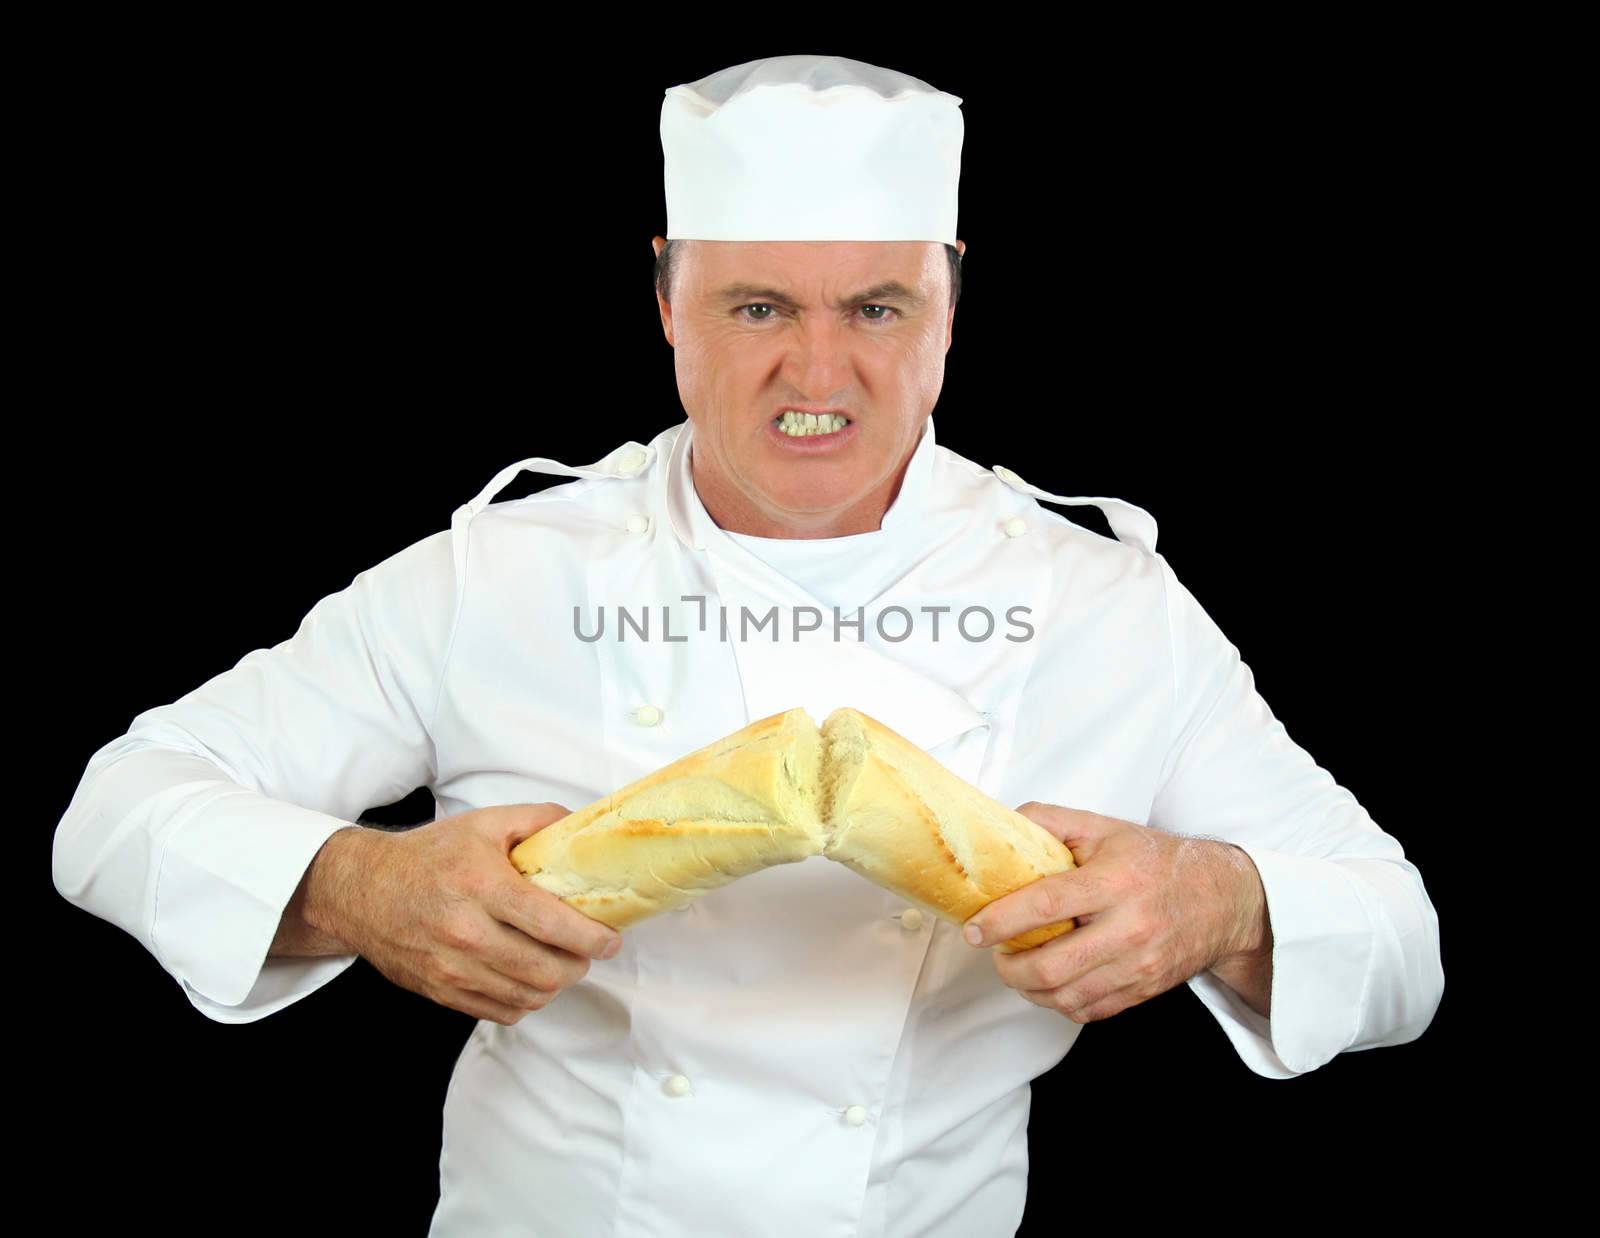 Strongman chef breaks a bread roll with his bare hands.